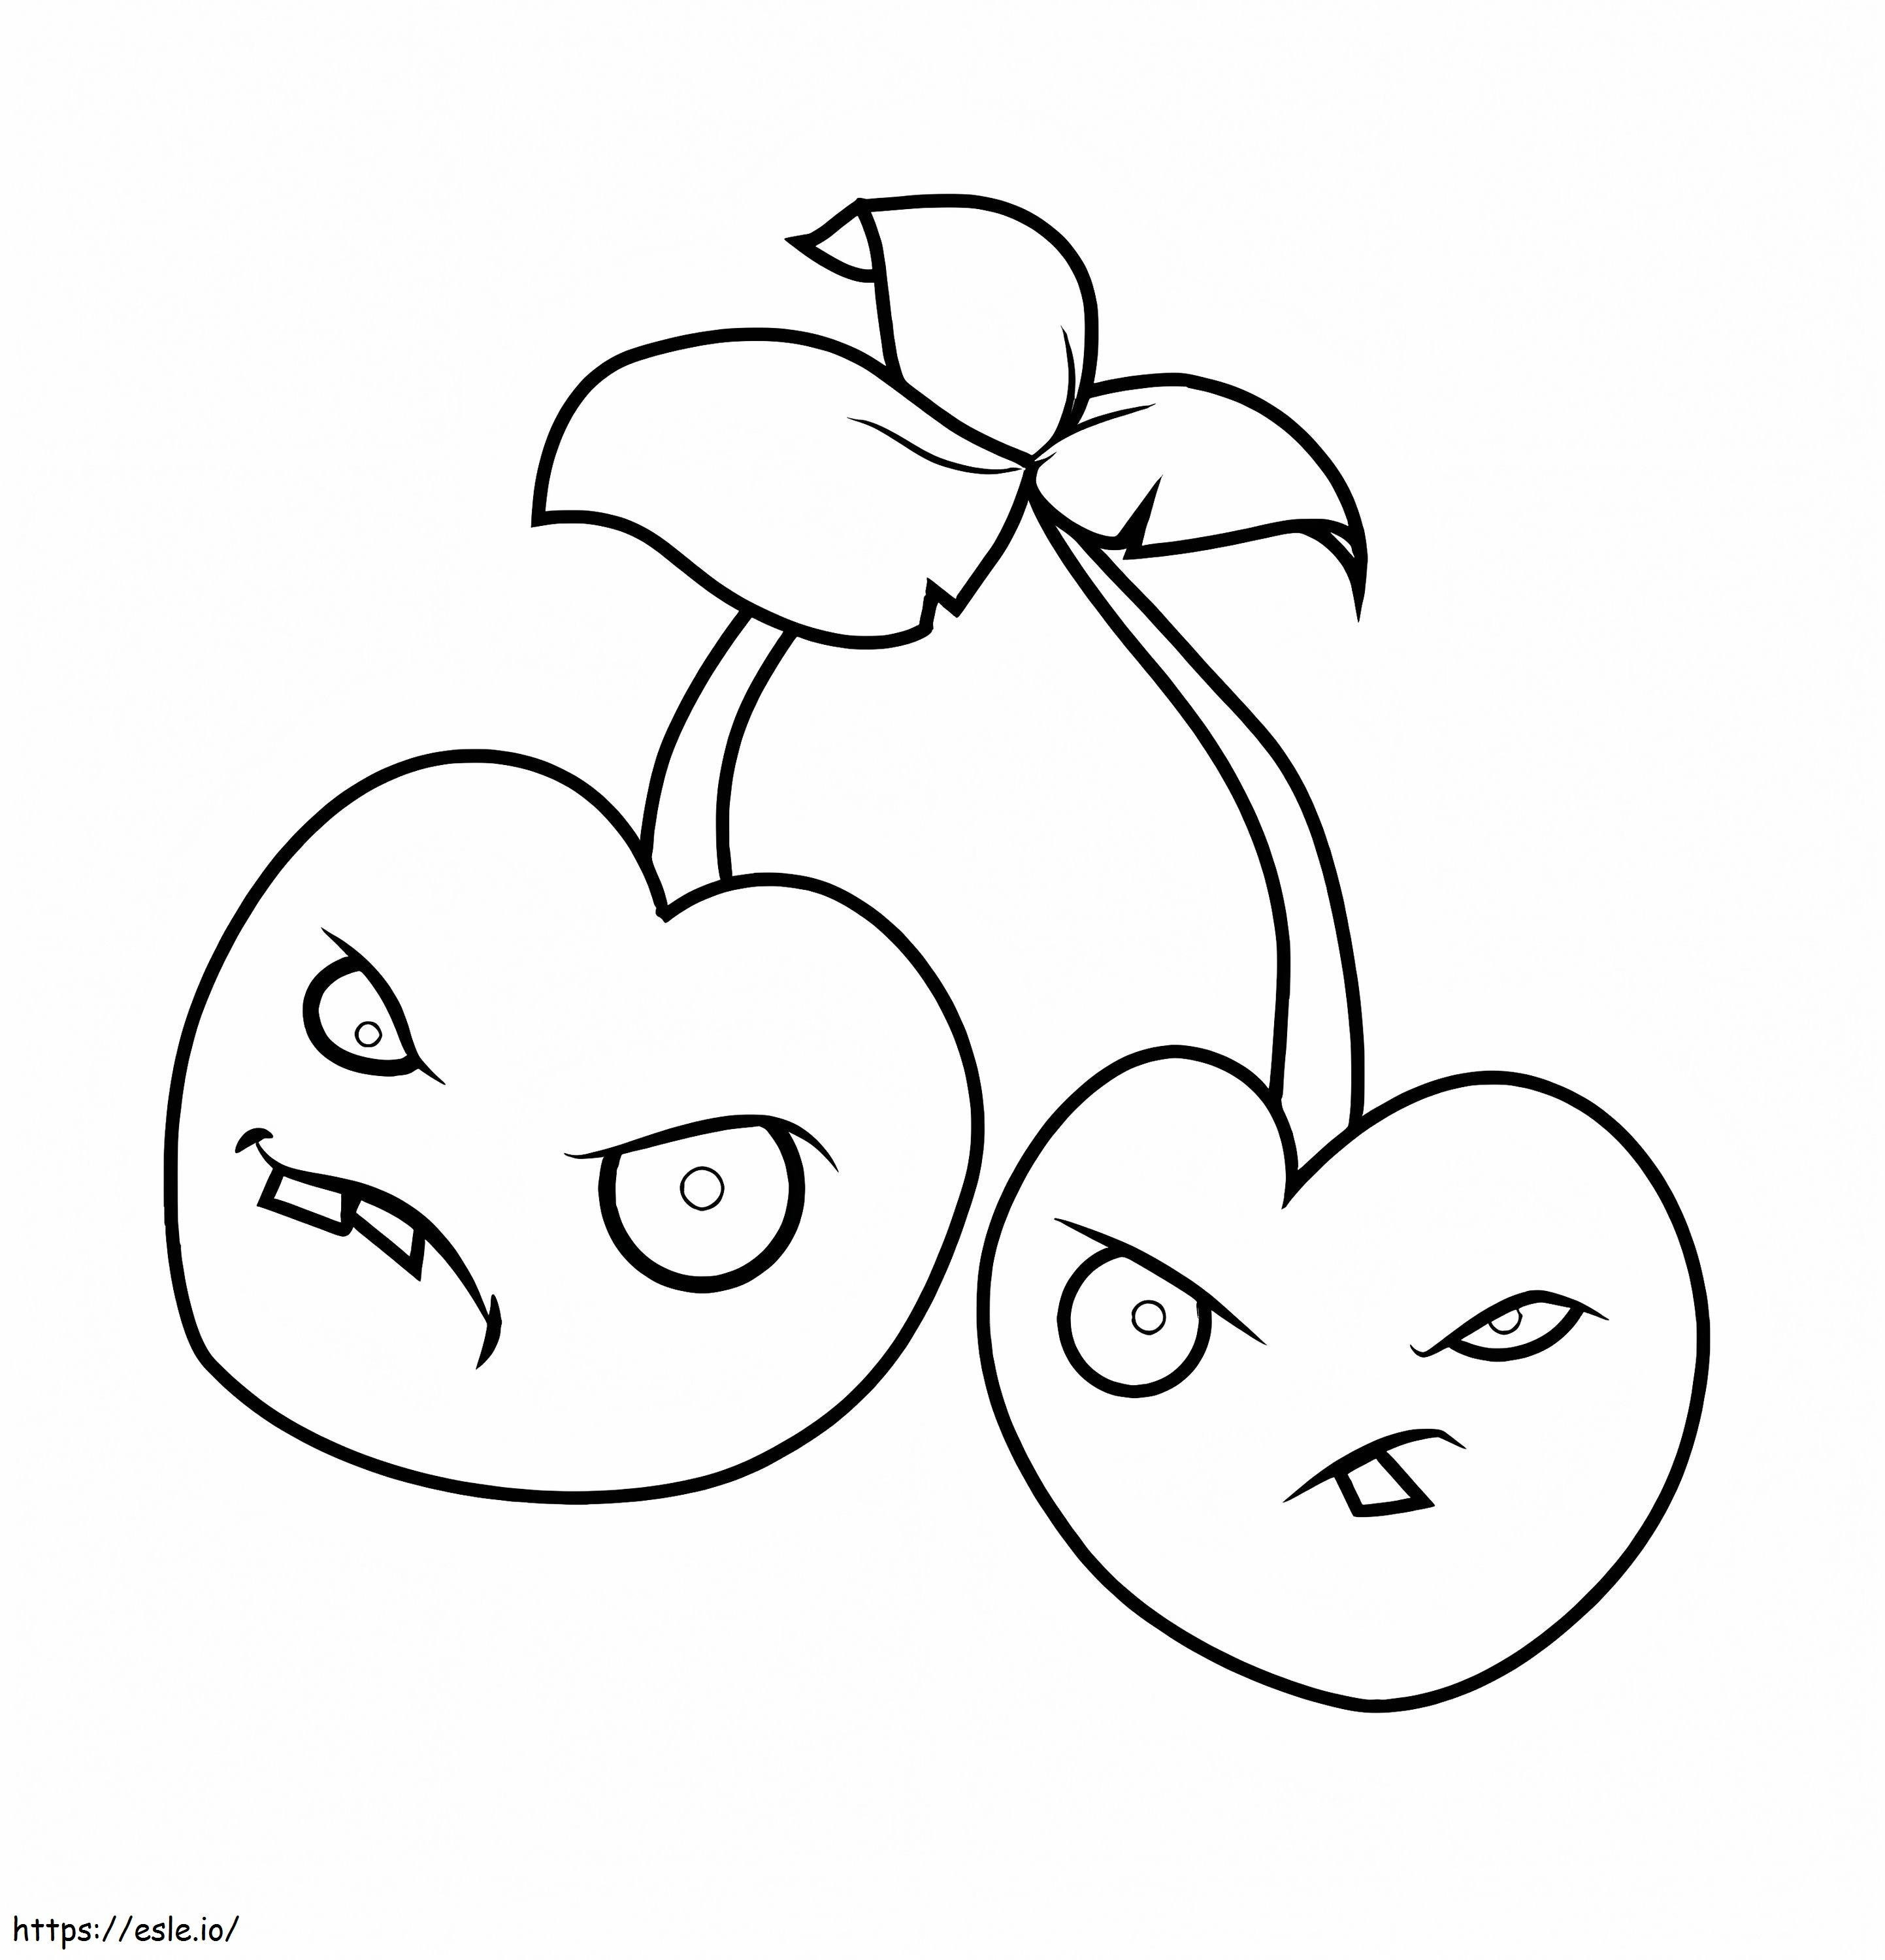 Two Plant And Zombie Chili Peppers coloring page